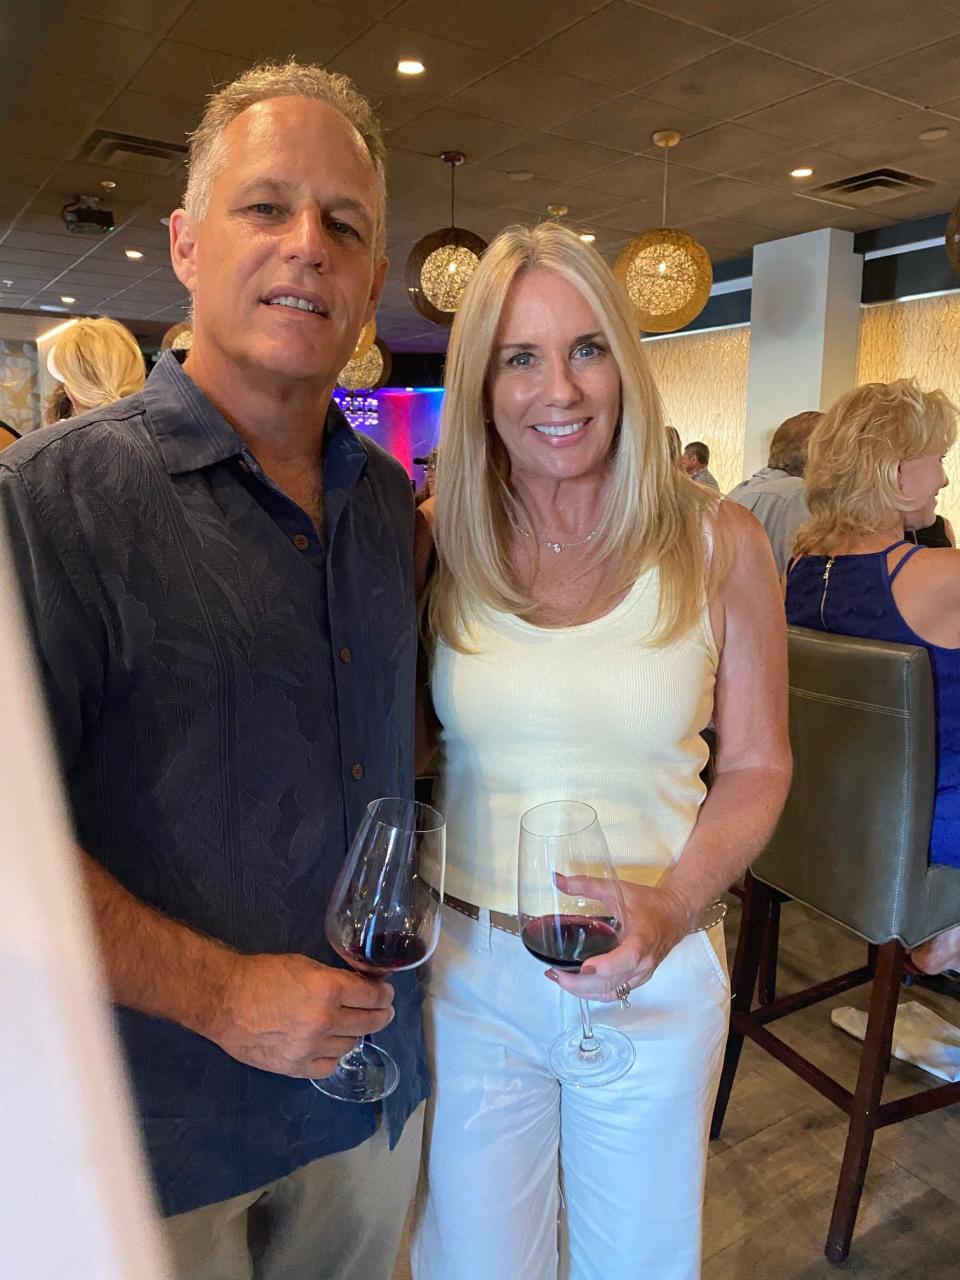 Wine Down Wednesday is sponsored by Todd and Meg Marker, owners of Marker Broadcasting. They are photographed at Wildest Restaurant in Palm Desert on June 30, 2021.